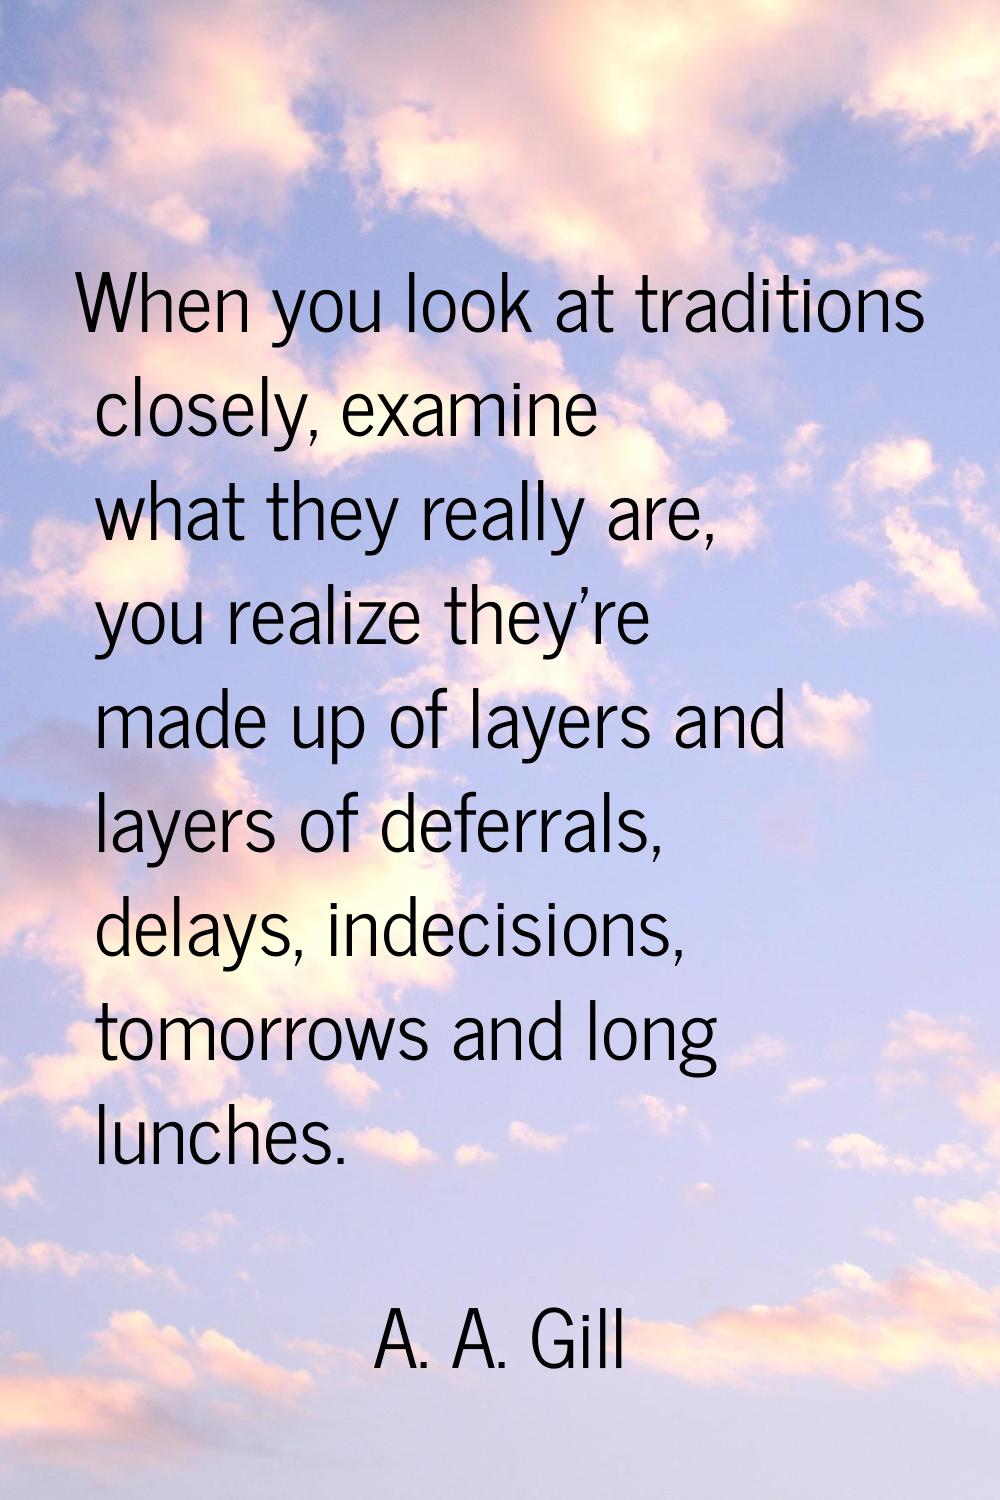 When you look at traditions closely, examine what they really are, you realize they're made up of l